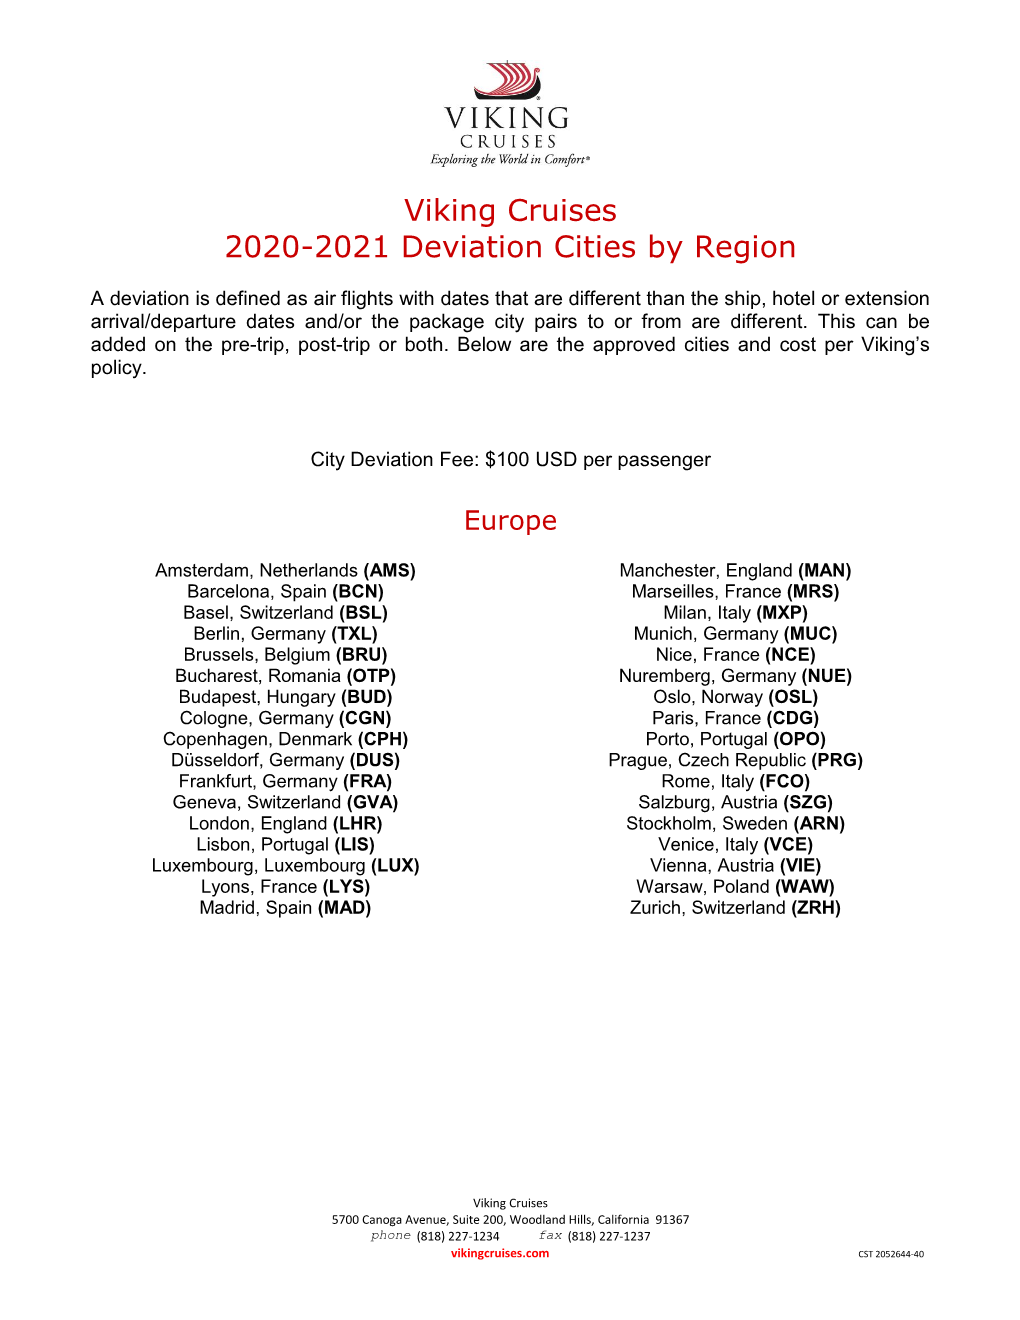 Viking Cruises 2020-2021 Deviation Cities by Region